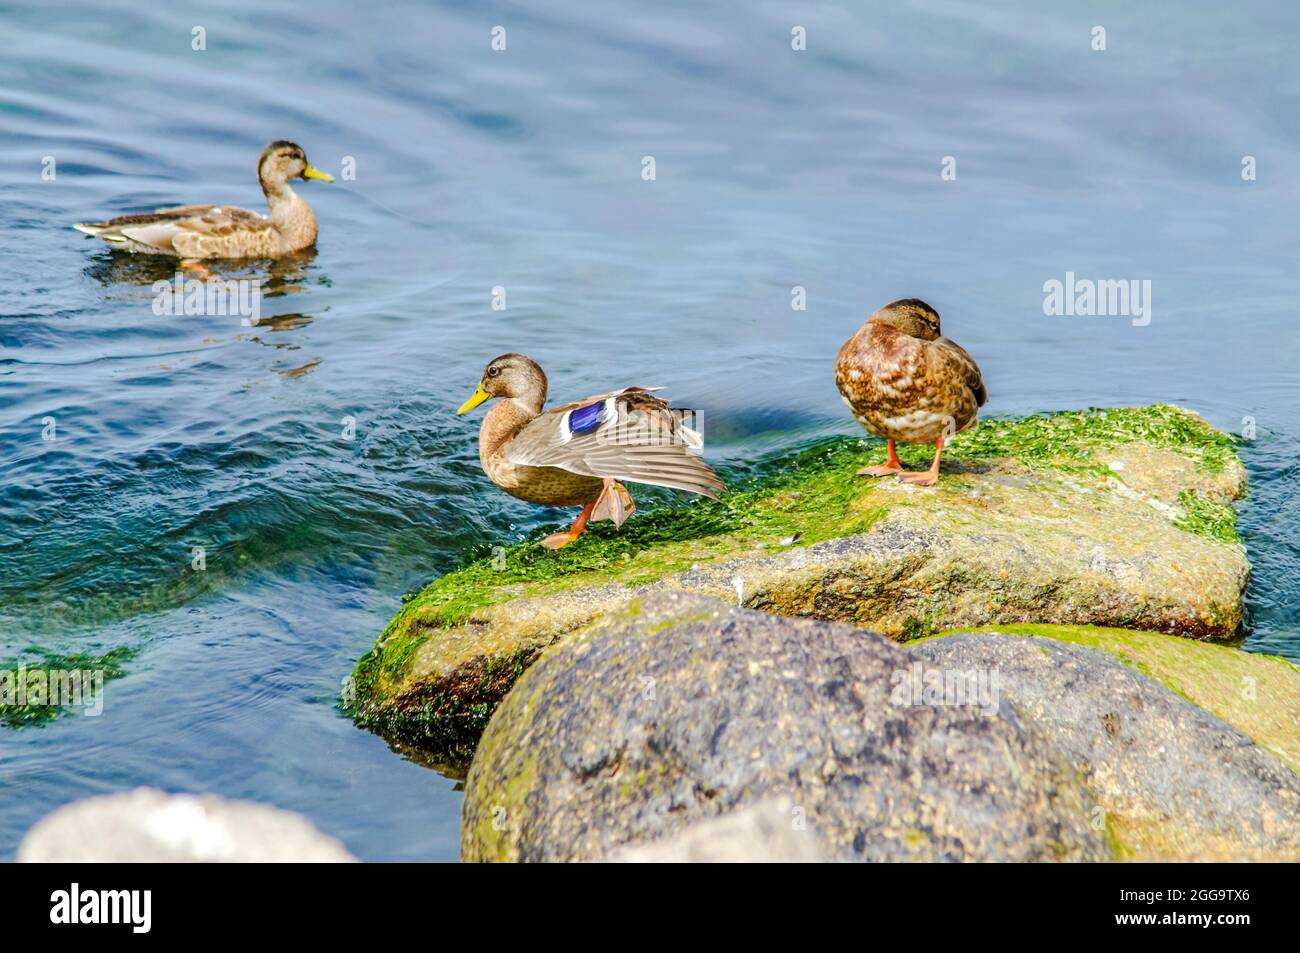 ducks on colorful sea stones covered with algae and seaweed Stock Photo